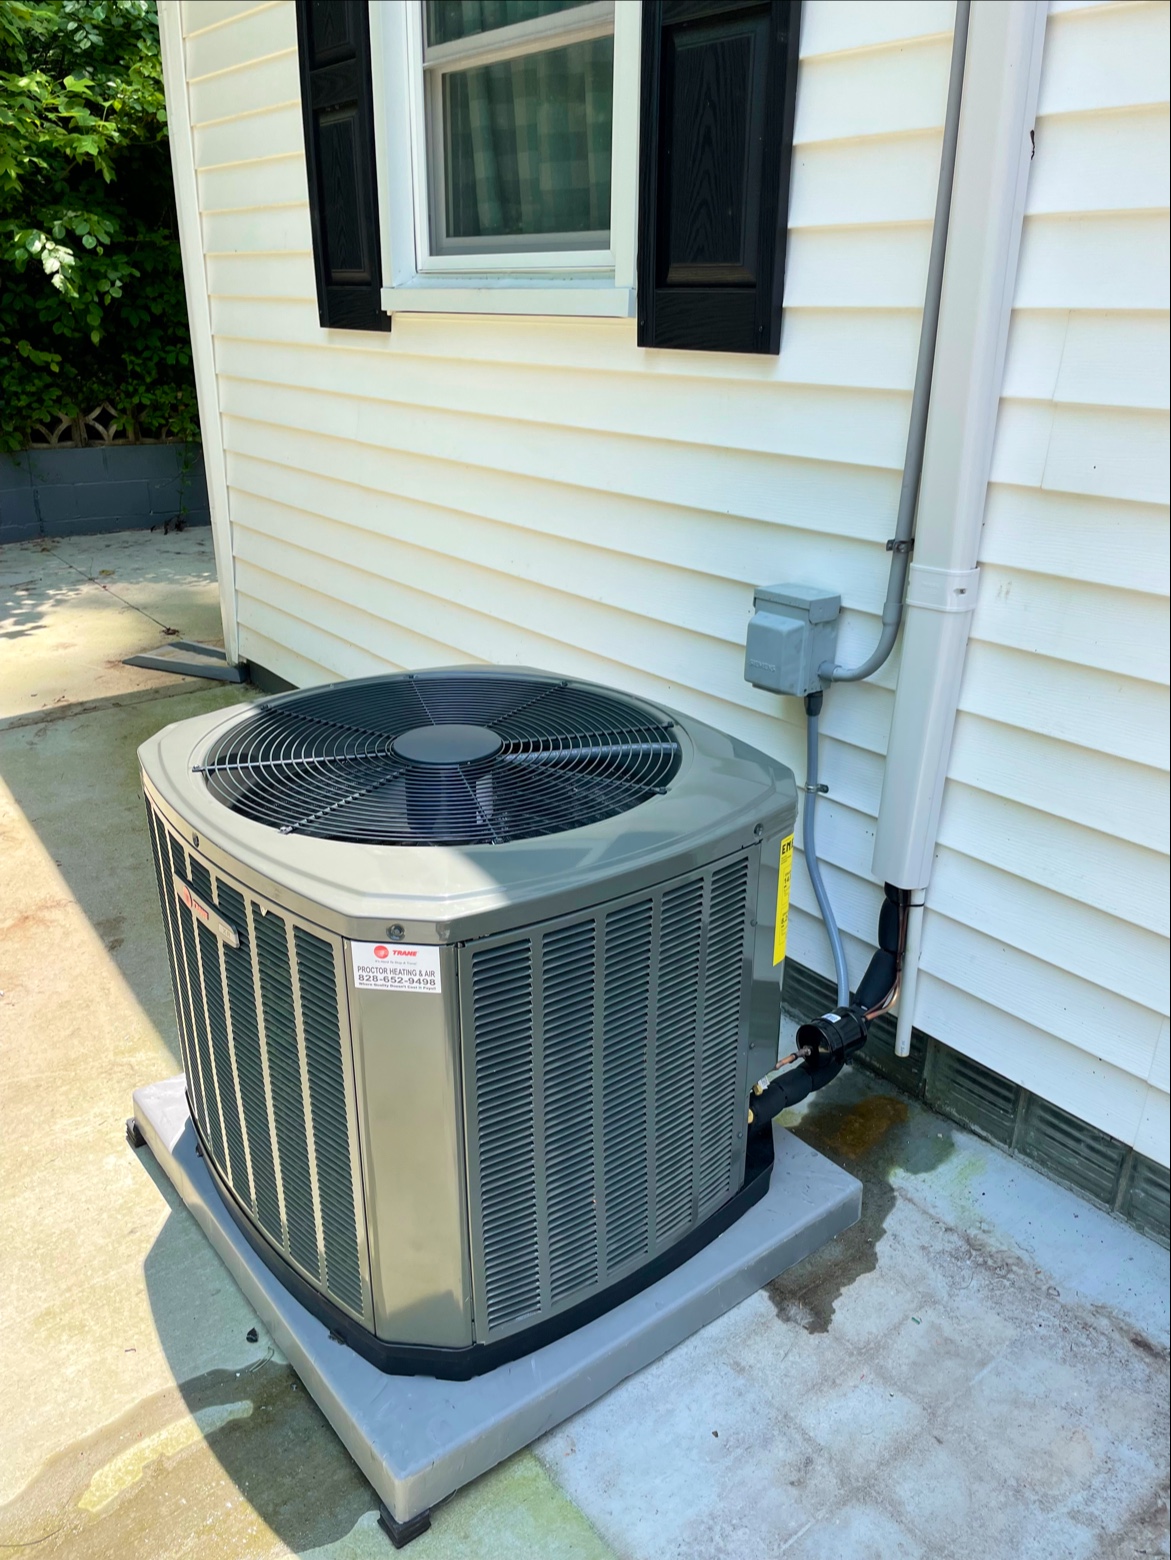 Proctor Heating & Air Conditioning